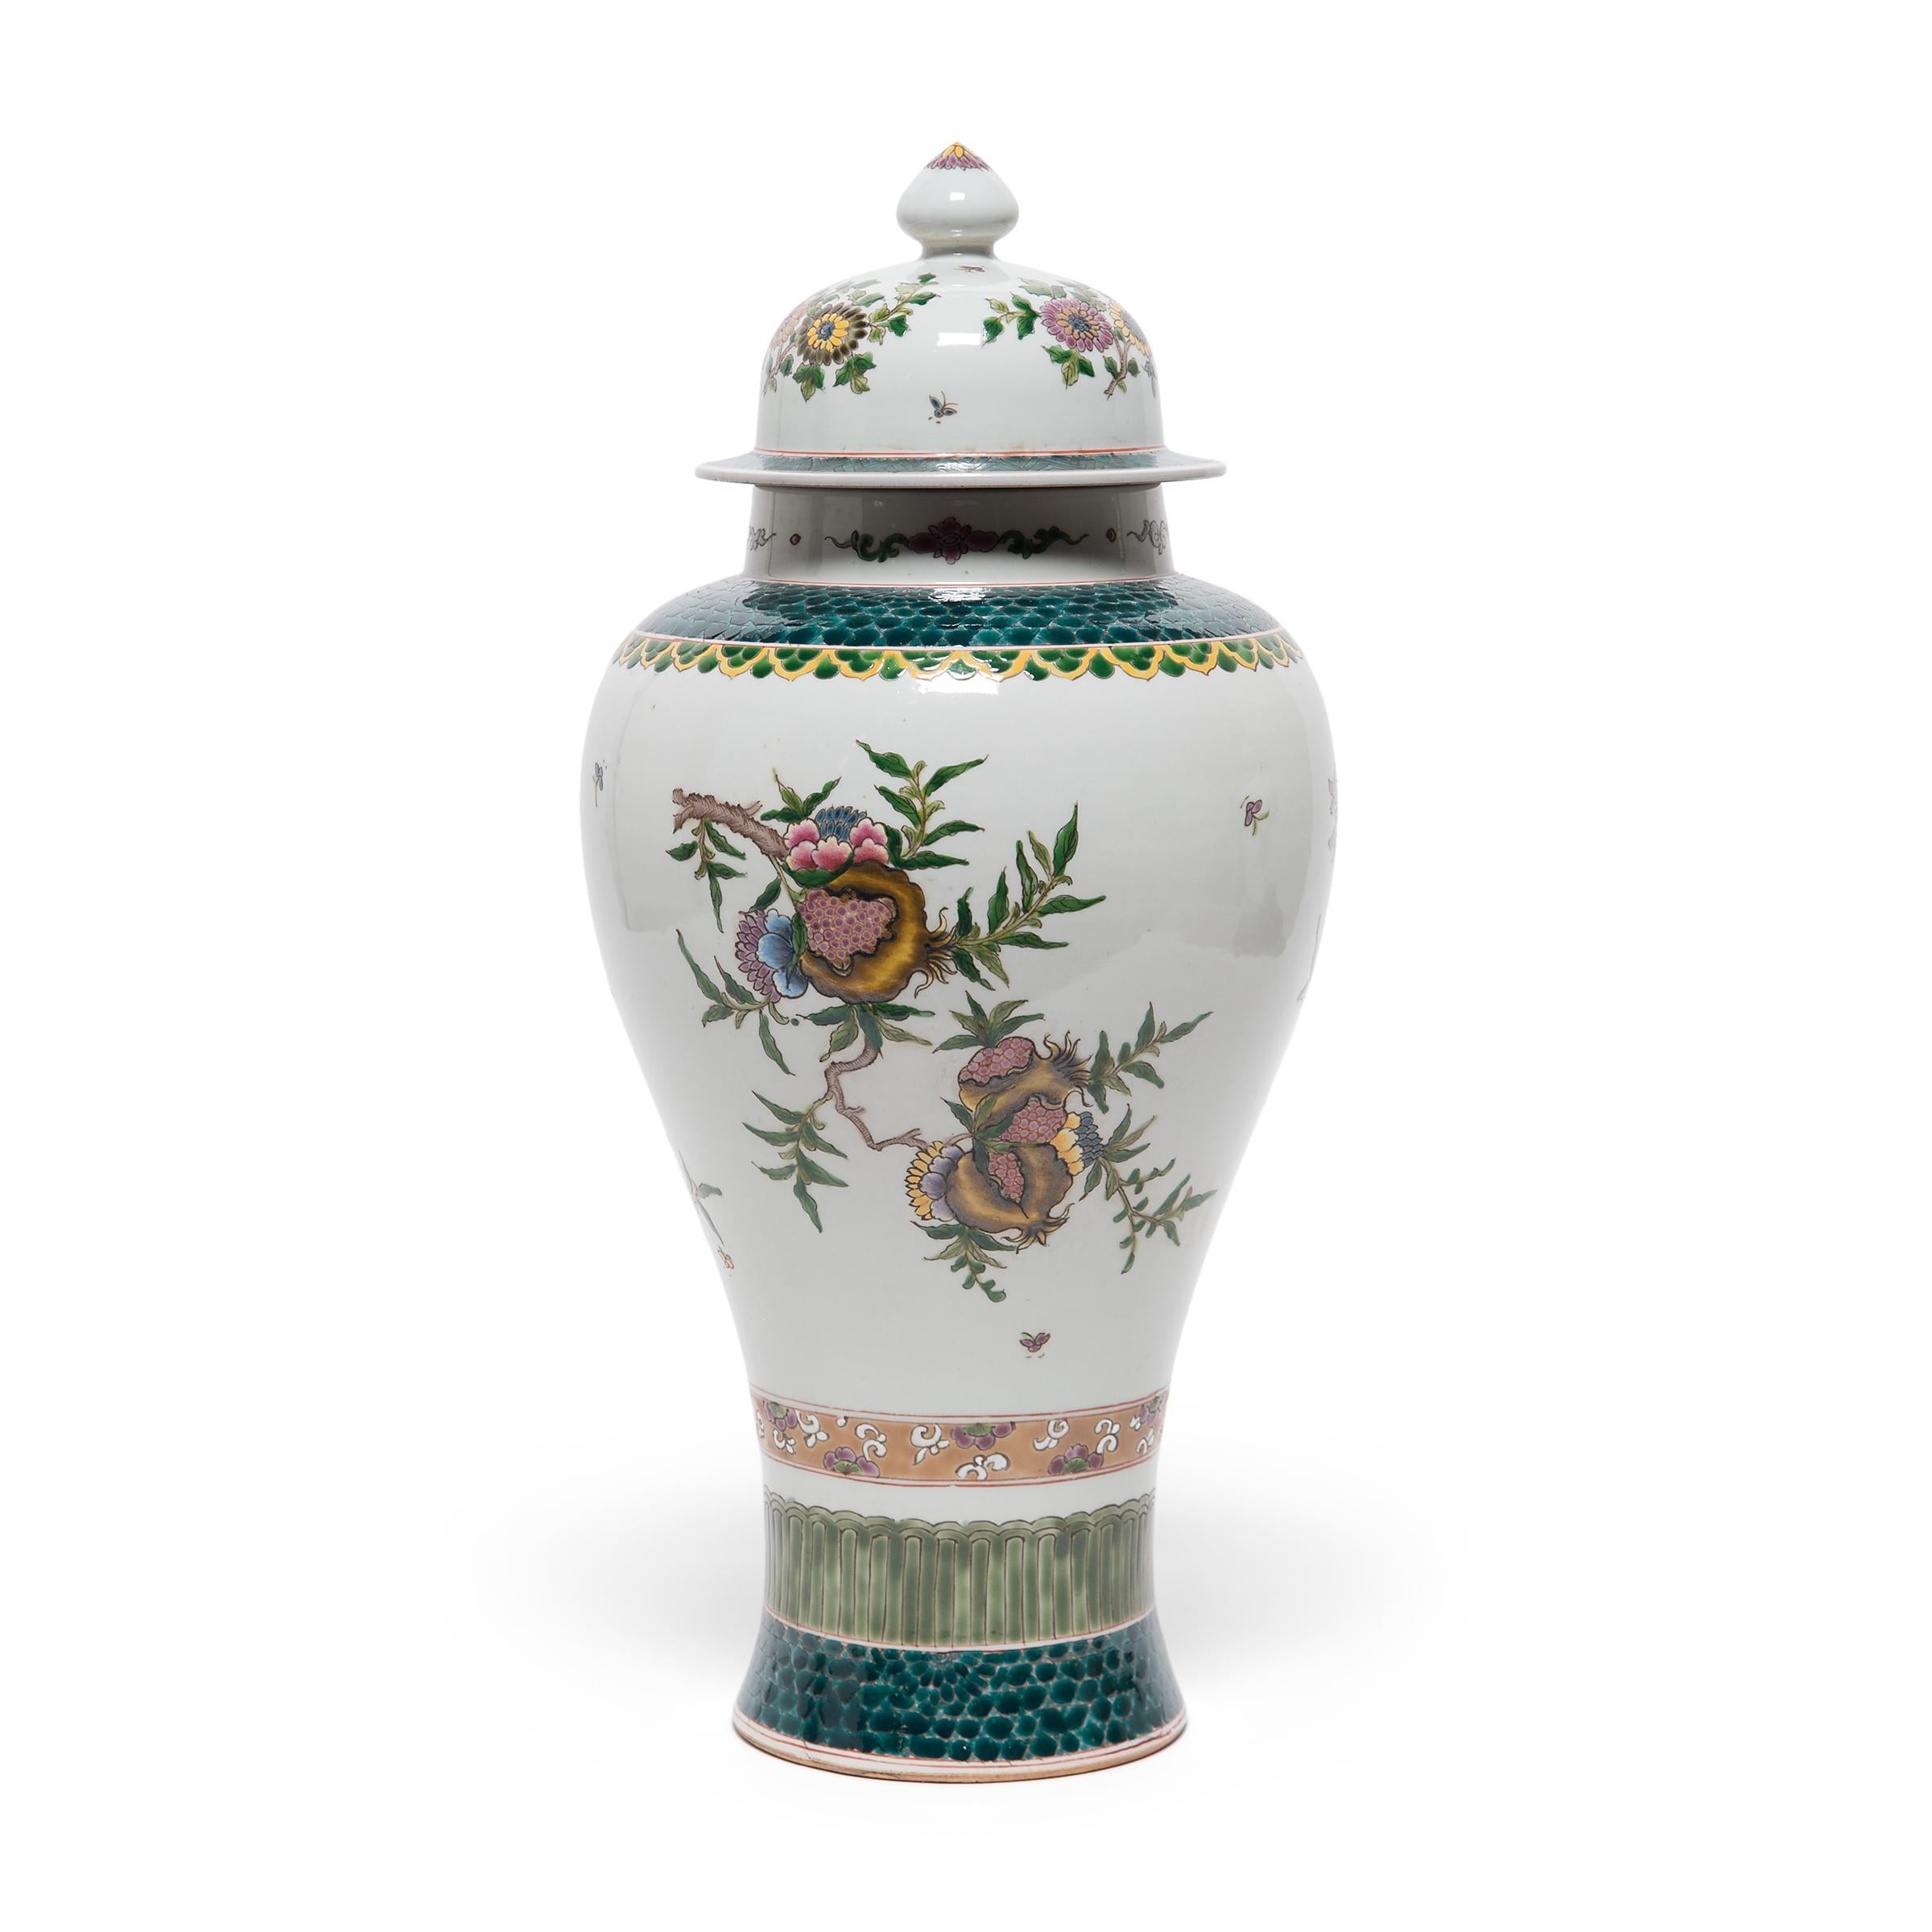 These elegant porcelain baluster jars are distinct for their wonderfully sculptural shape, defined by a rounded body that tapers gracefully to a narrow, flared base. The pair is decorated with overglaze enamels in the famille verte style, using a